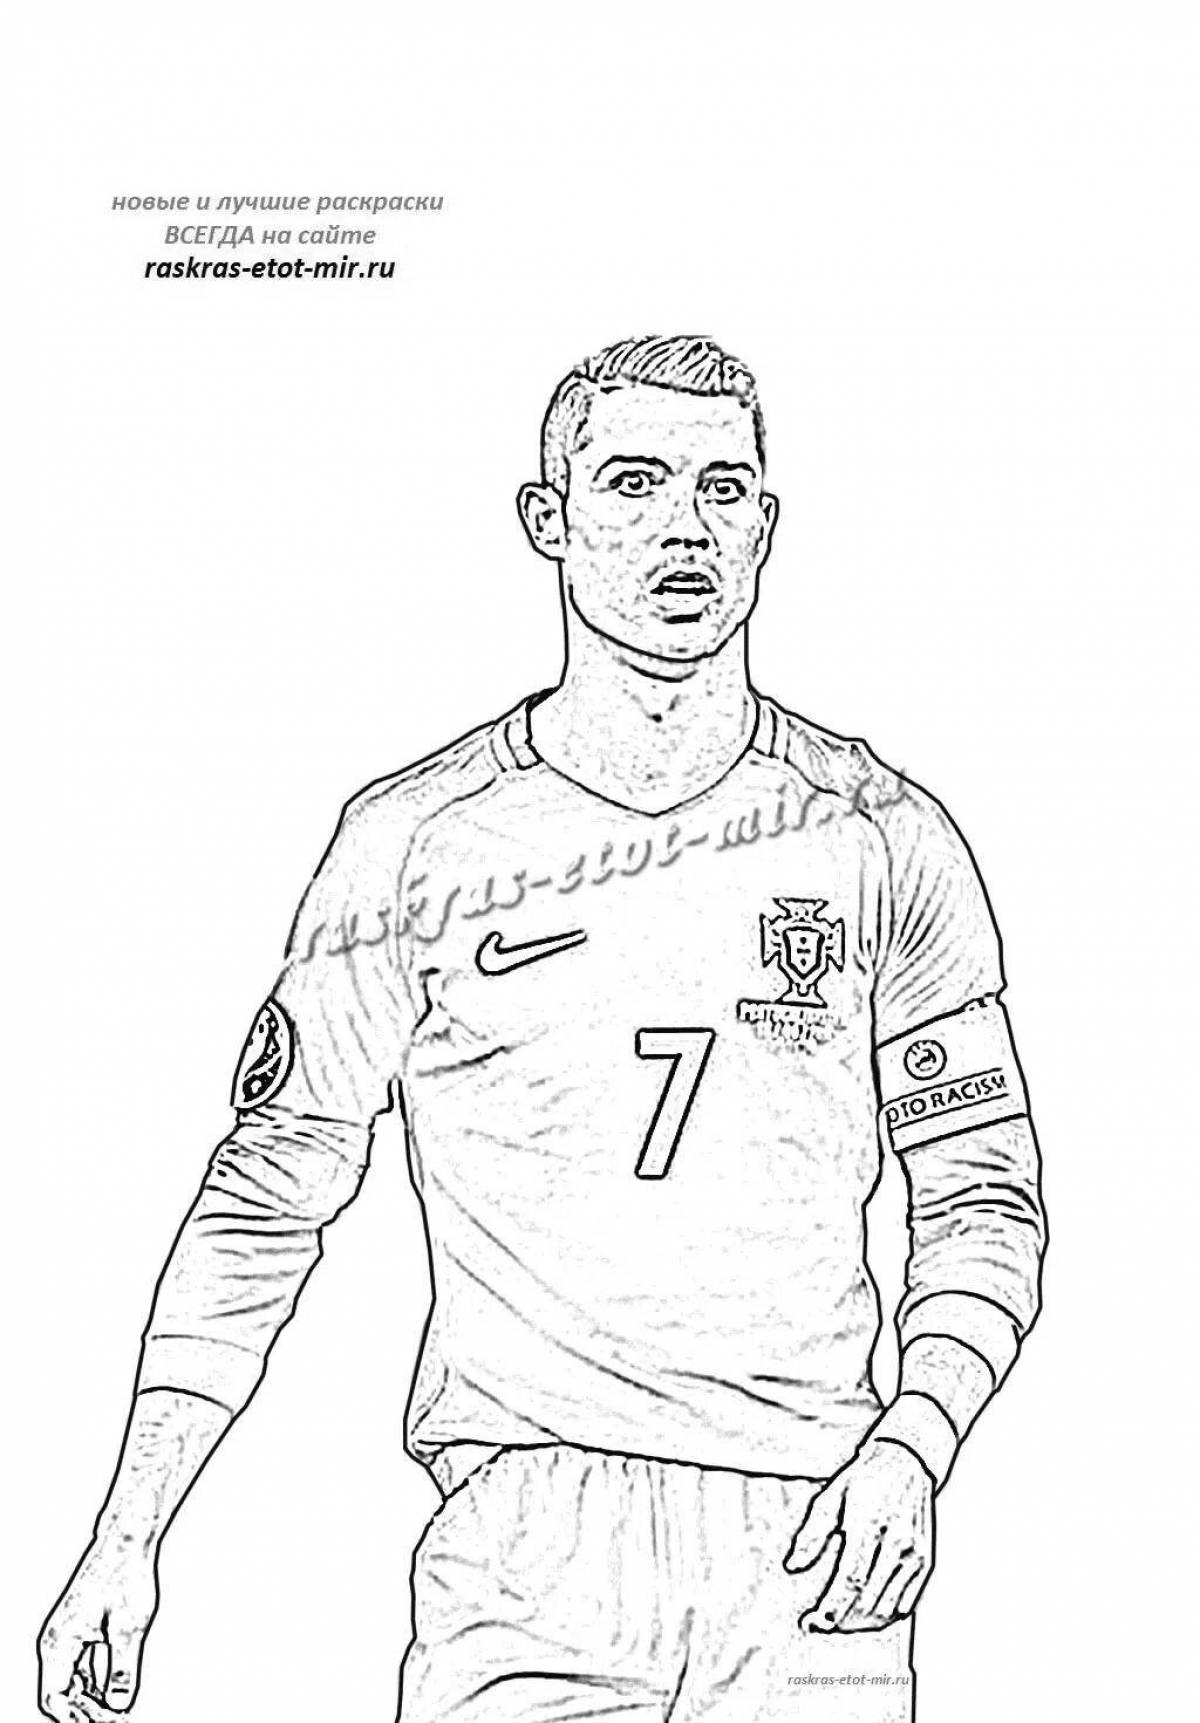 Coloring pages of famous football players